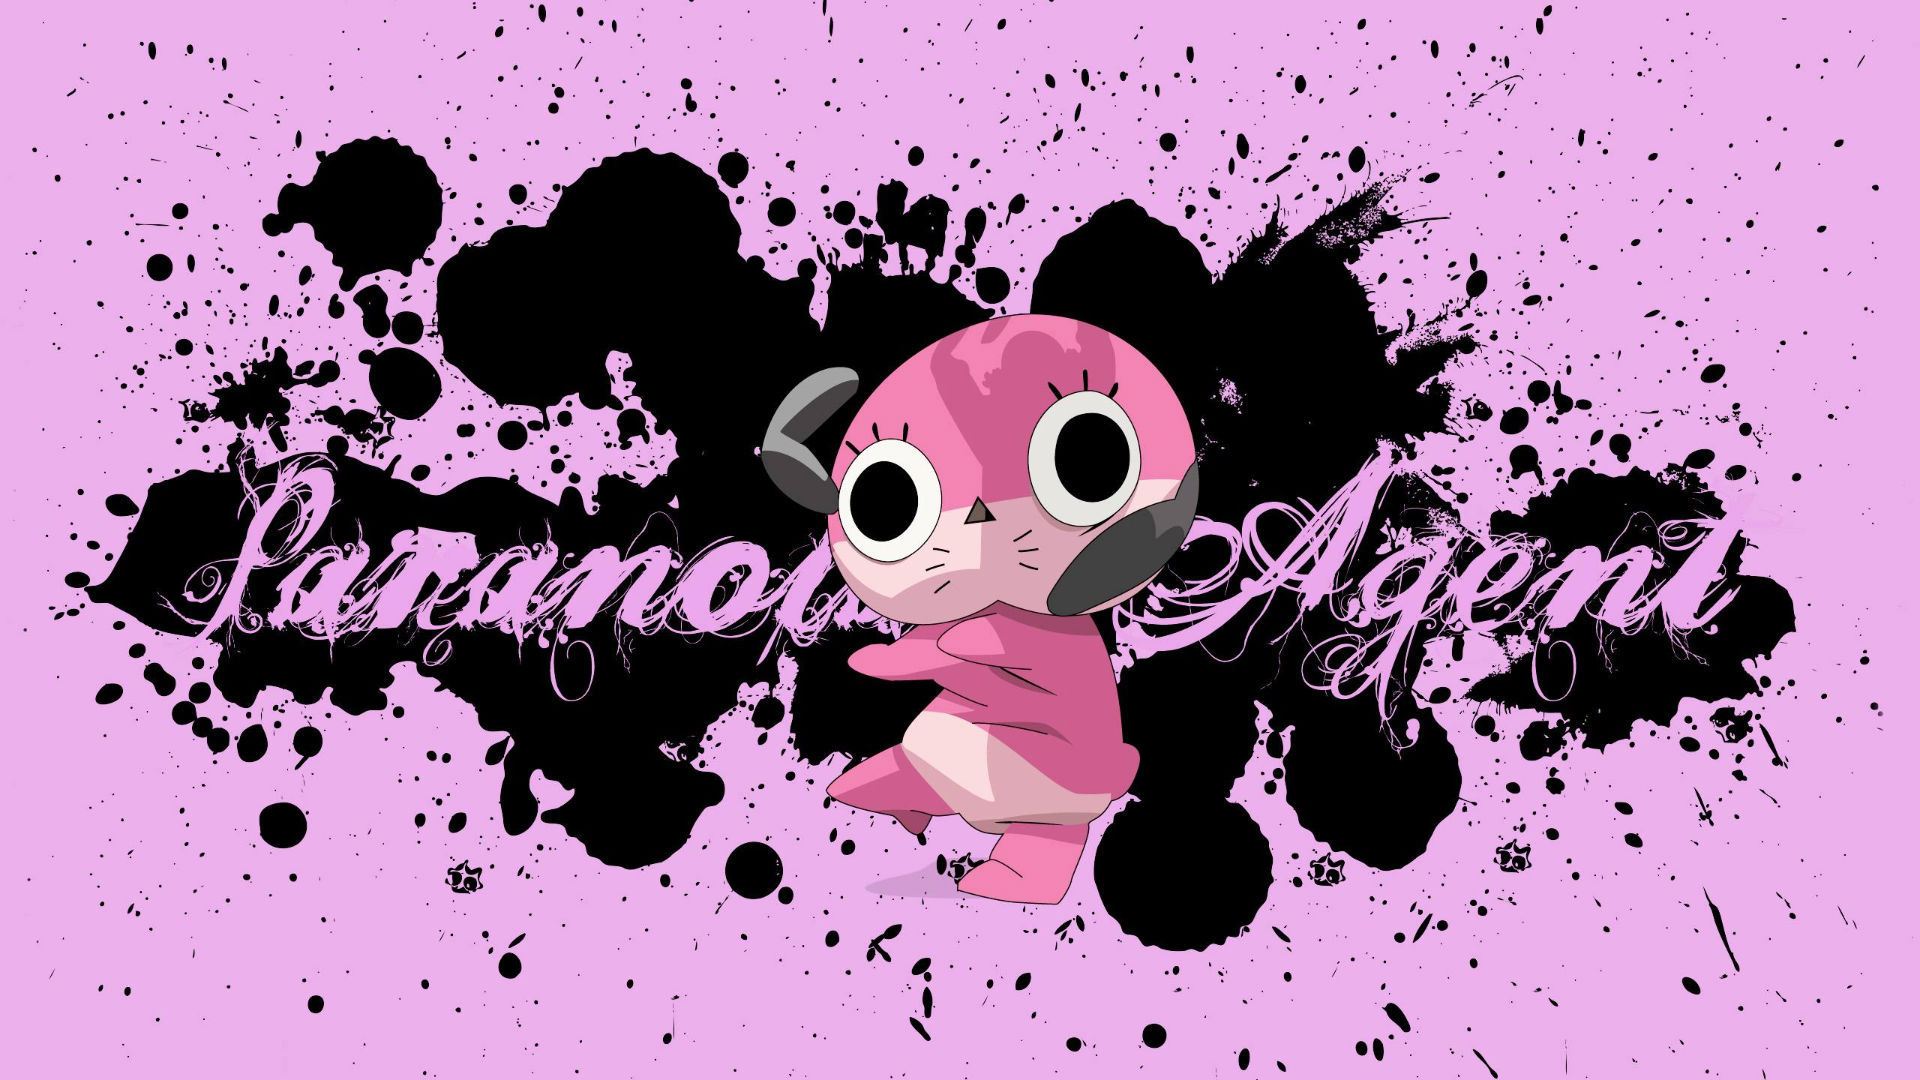 paranoia agent wallpapers and images   wallpapers